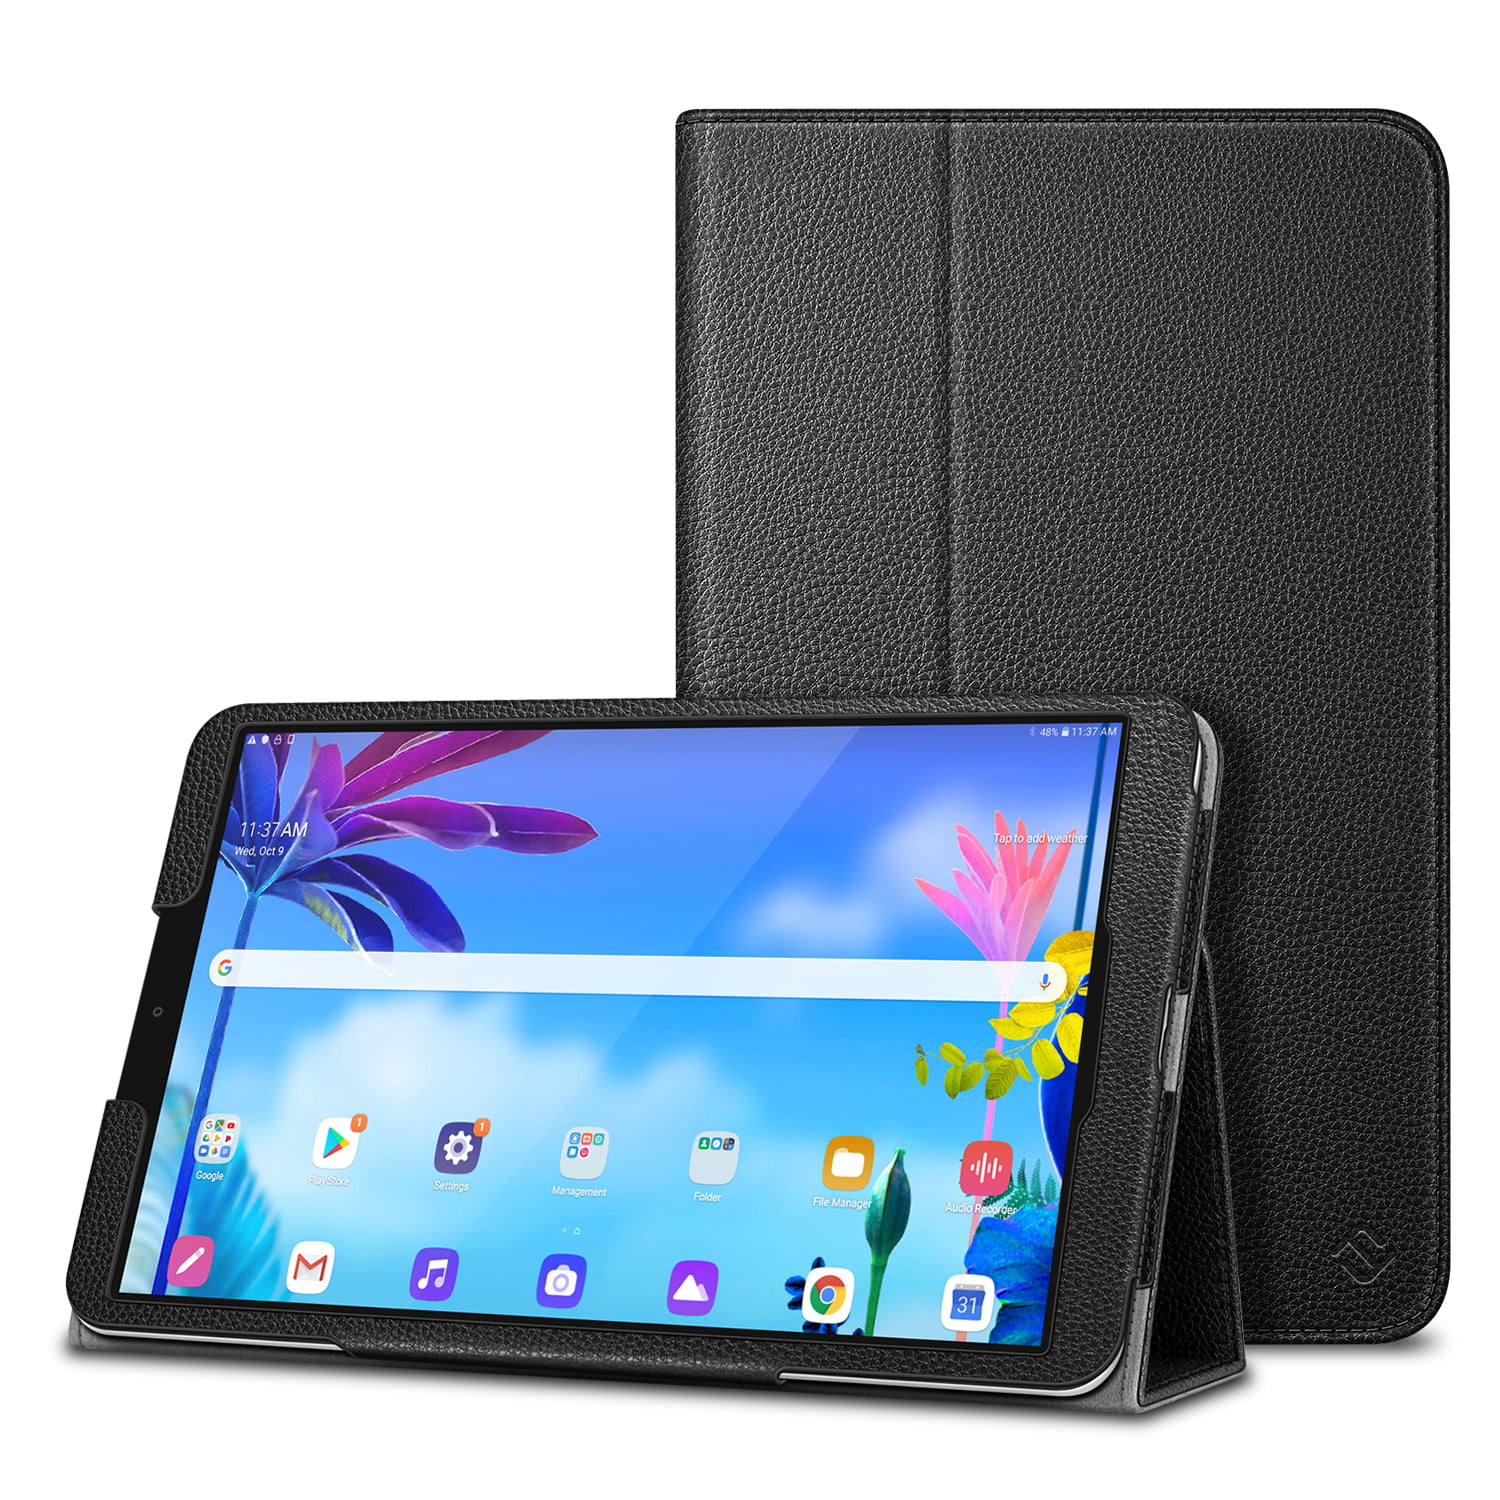 Case for LG G Pad 5 10.1 FHD, Fintie Premium Vegan Leather Folio Stand  Protective Cover with Auto Sleep/Wake for 10.1 inch LG GPad 5 2019 Tablet